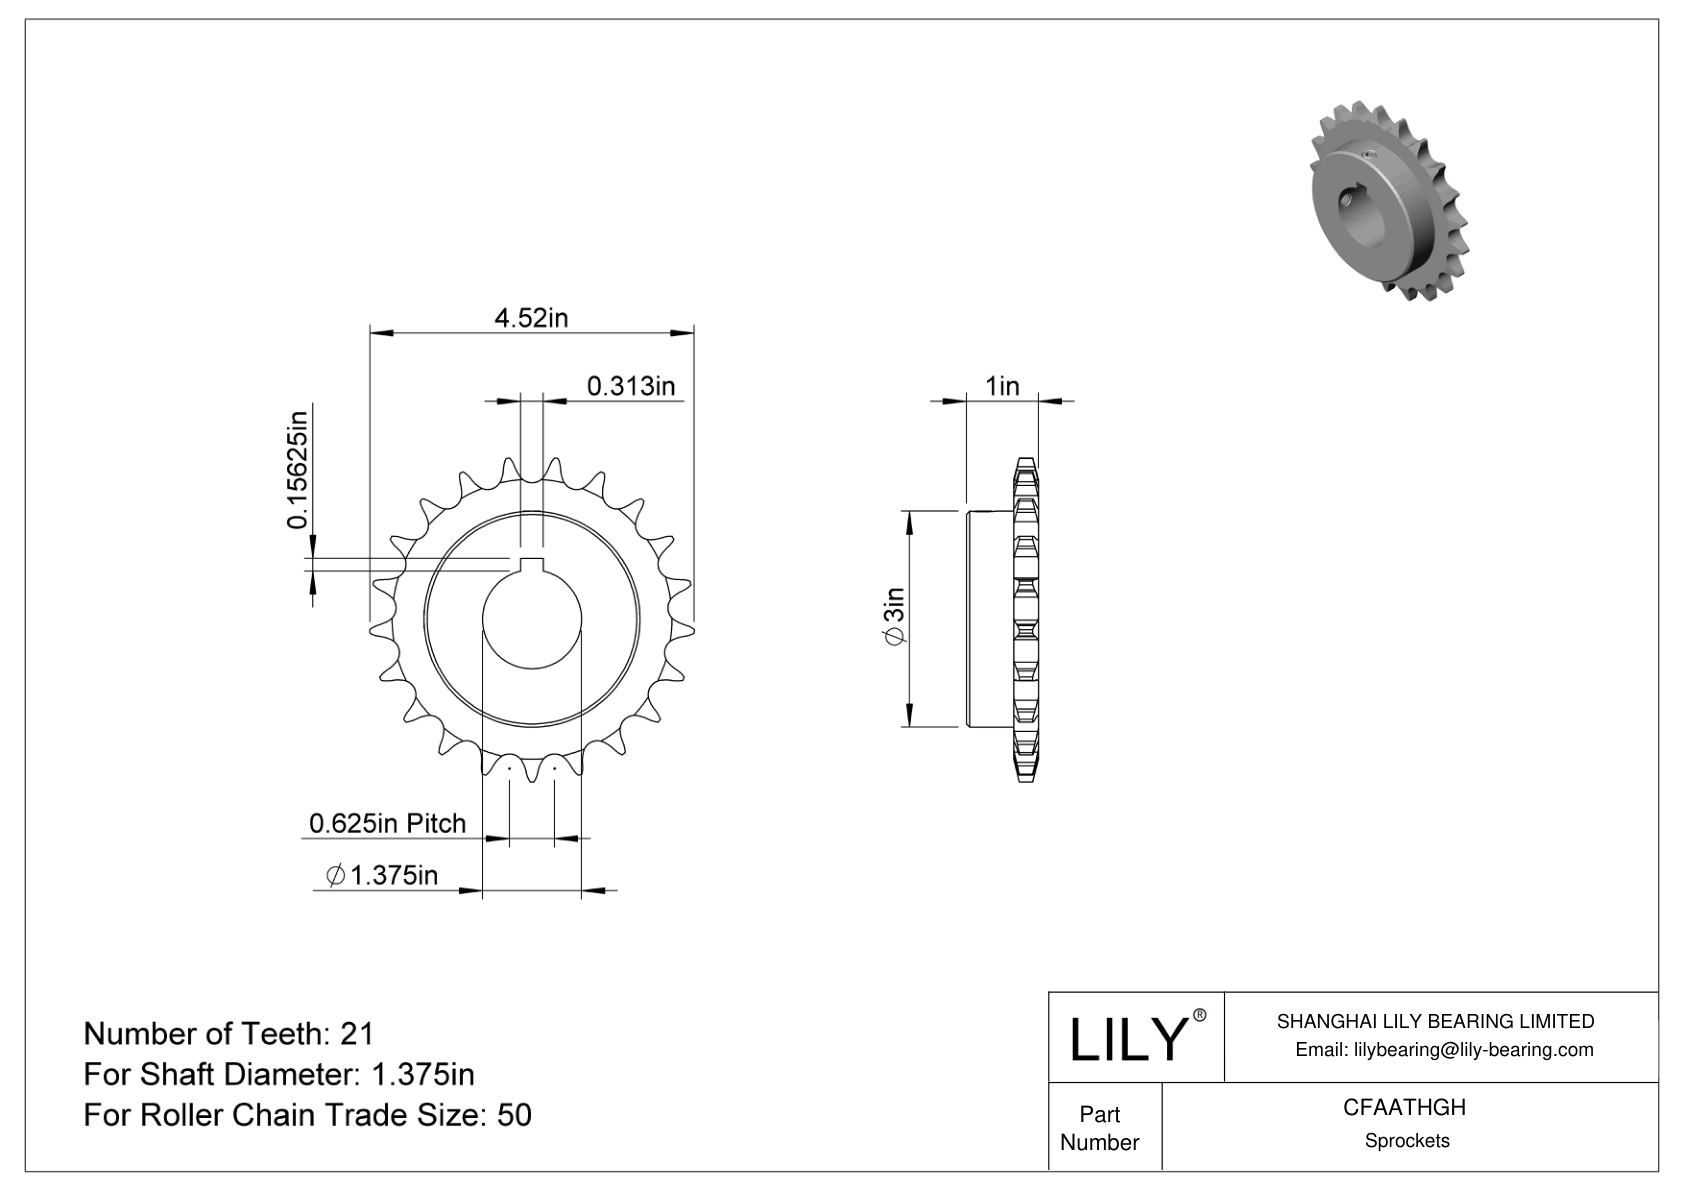 CFAATHGH Wear-Resistant Sprockets for ANSI Roller Chain cad drawing